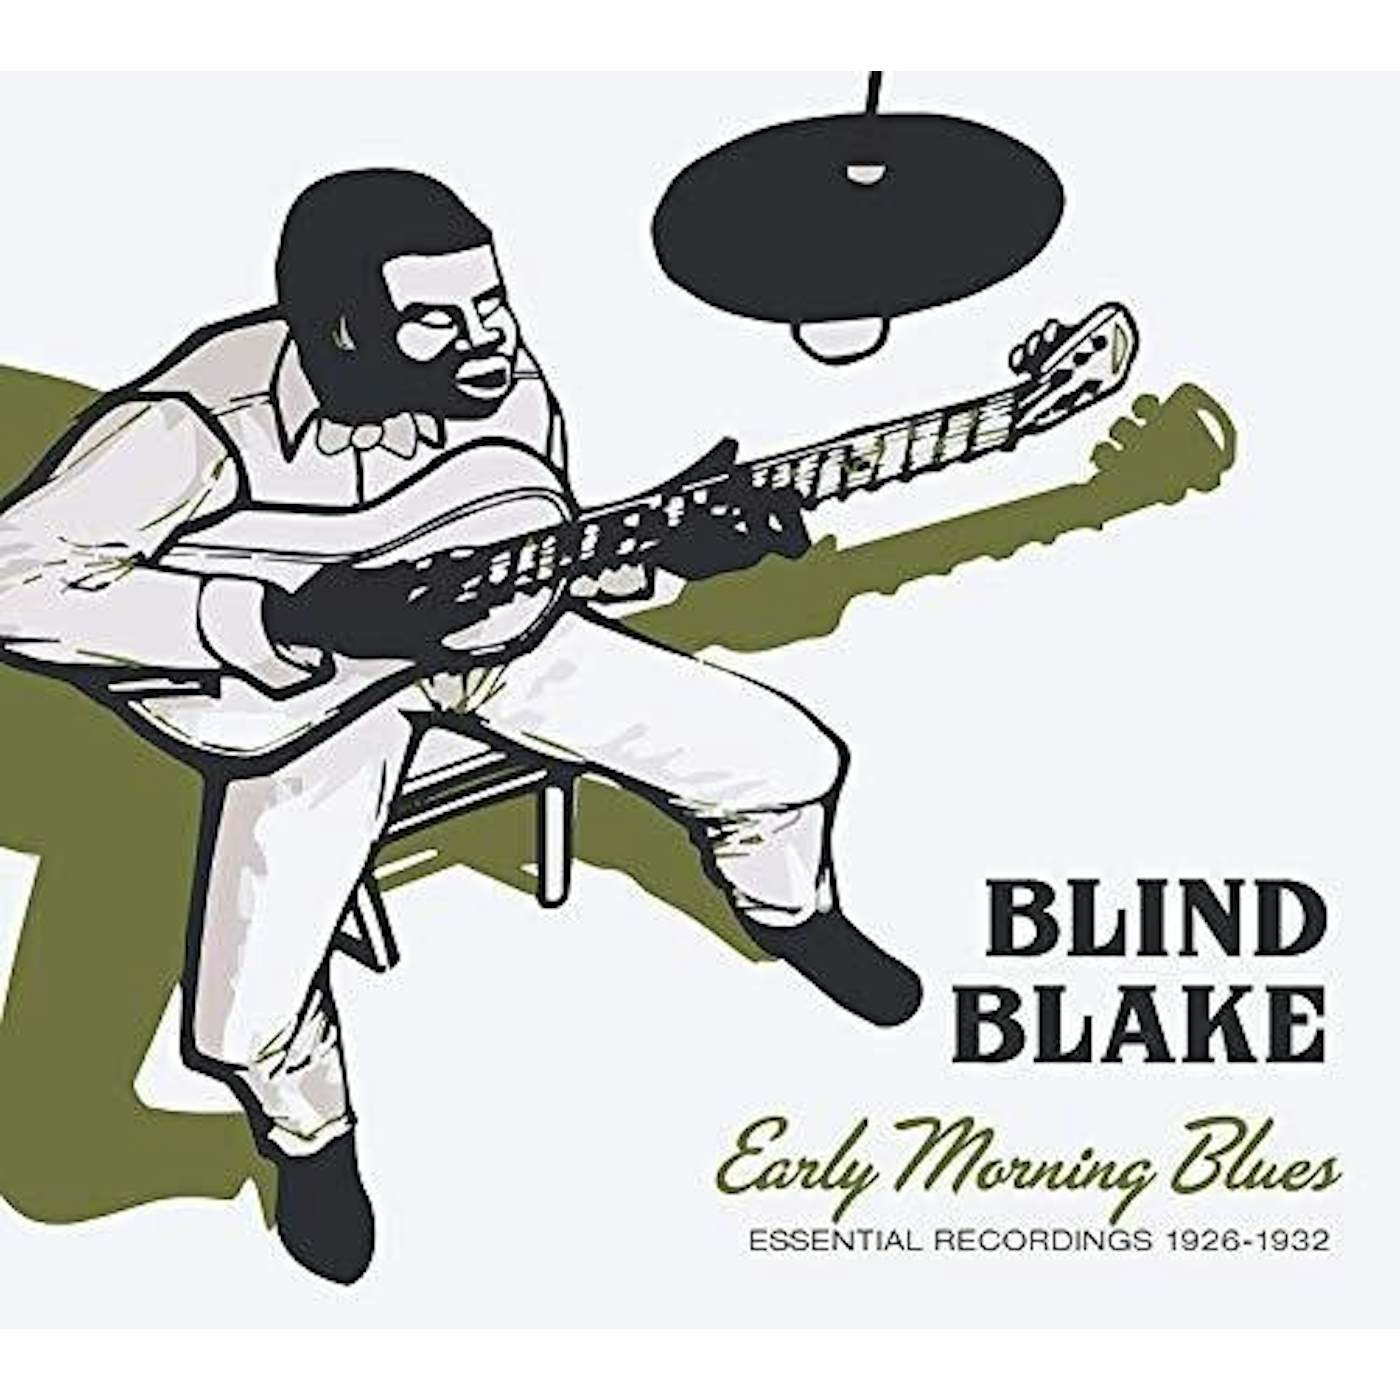 Blind Blake EARLY MORNING BLUES: ESSENTIAL RECORDINGS 26-32 CD